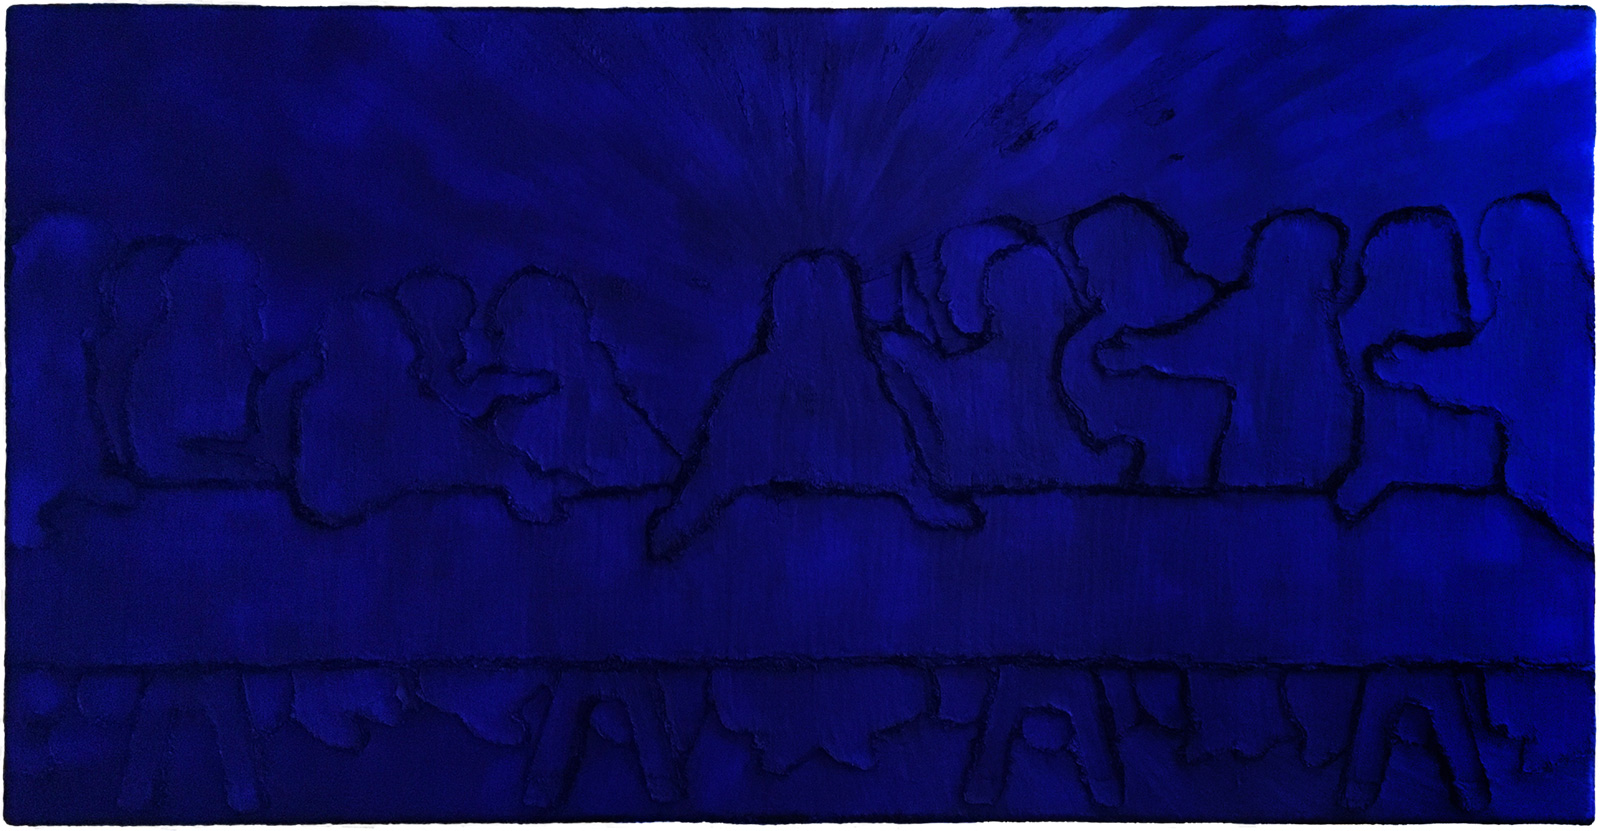 Blue Last Supper, a painting by Guido Vrolix